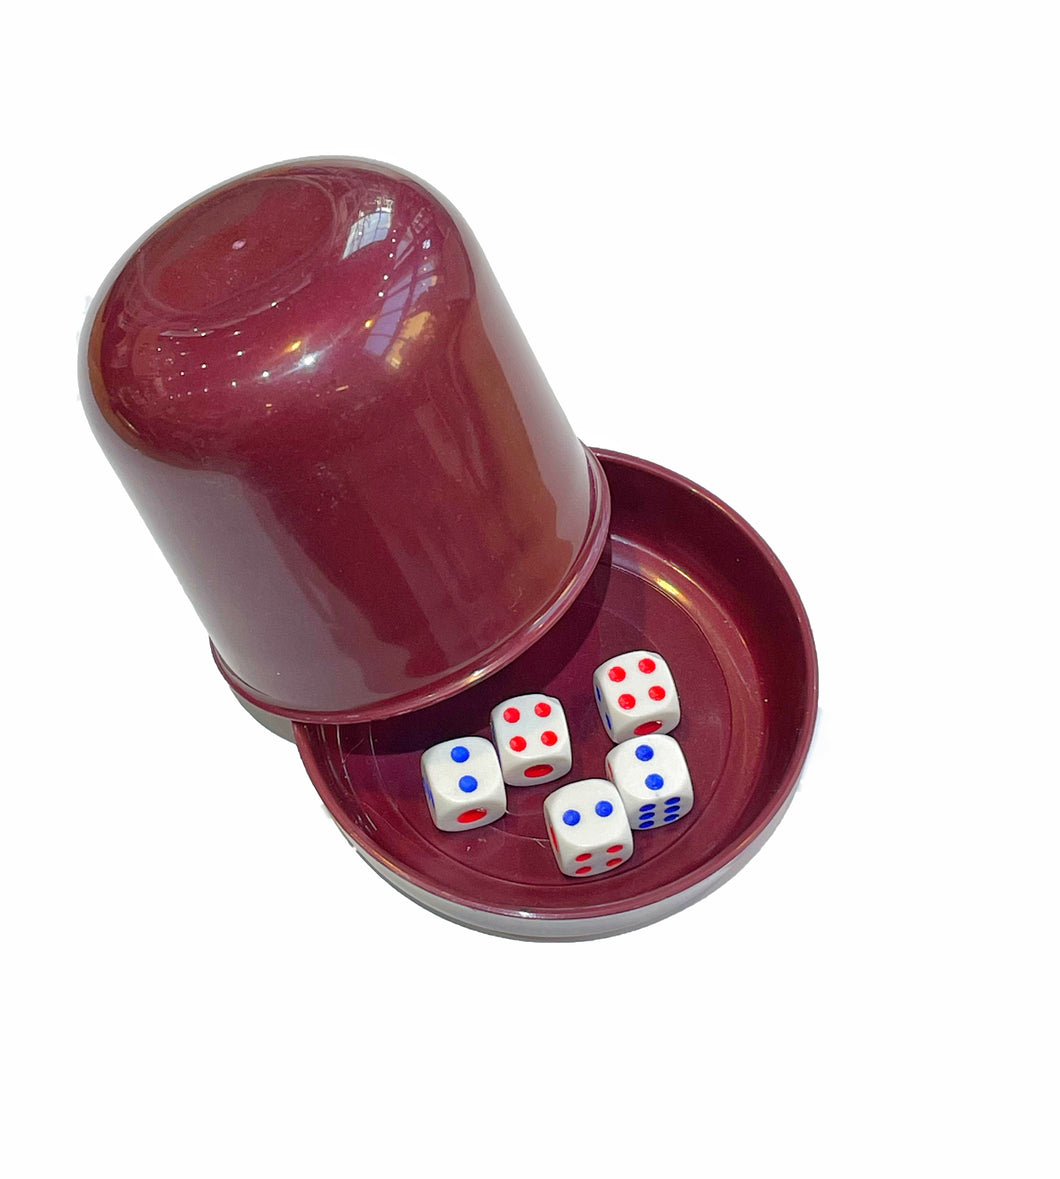 Dice Cup - Burgundy Red with 5 Dices <br> 酒紅色骰盅和5顆骰子